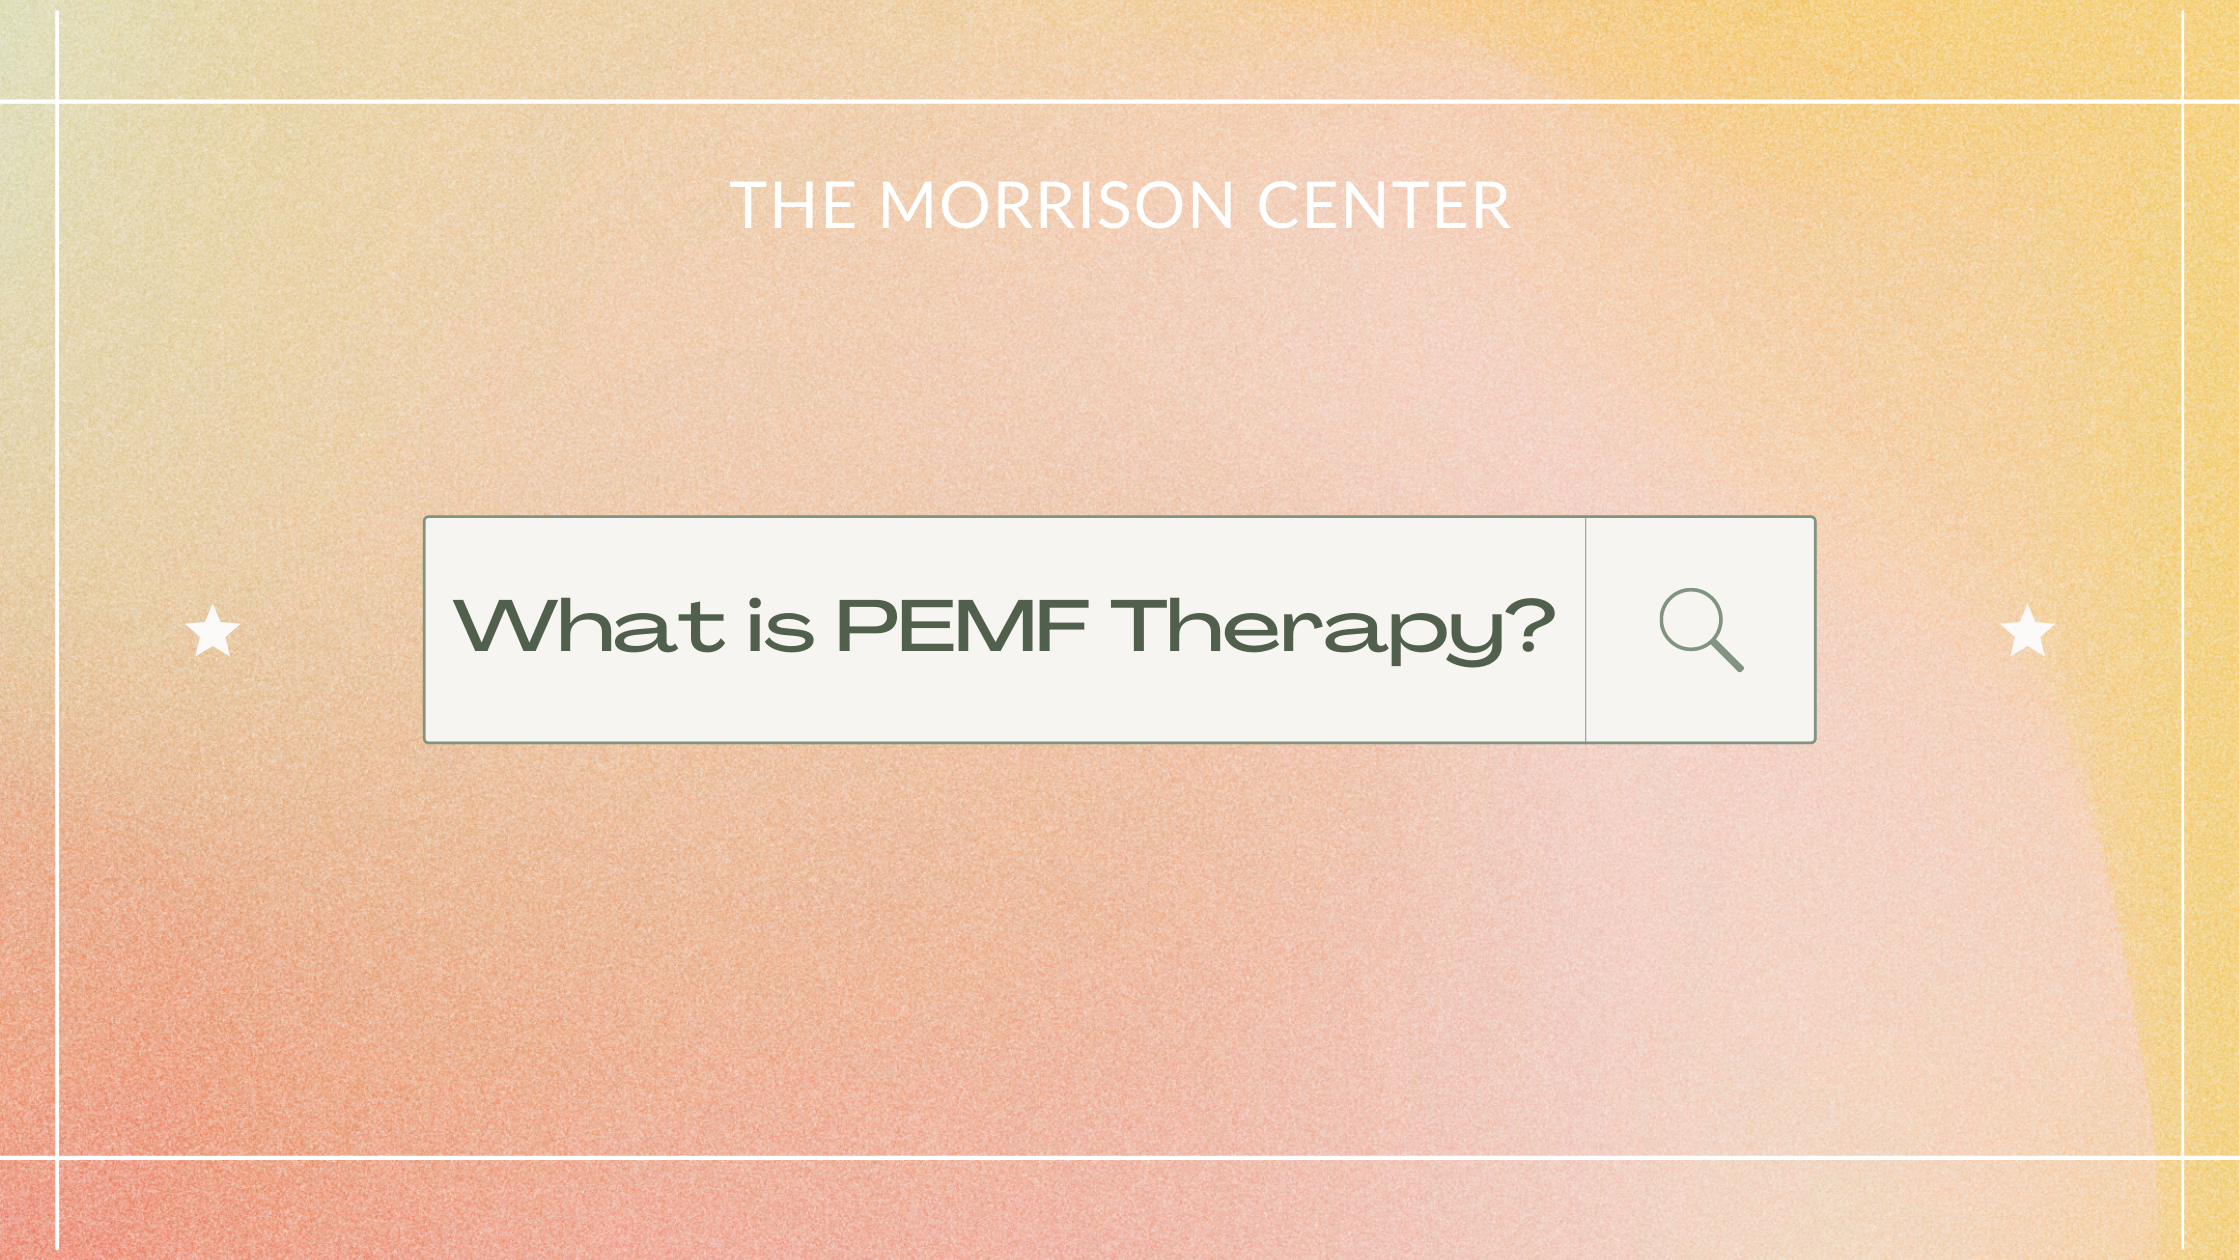 5 Best Practices for Proper Use of PEMF Therapy Devices to Improve